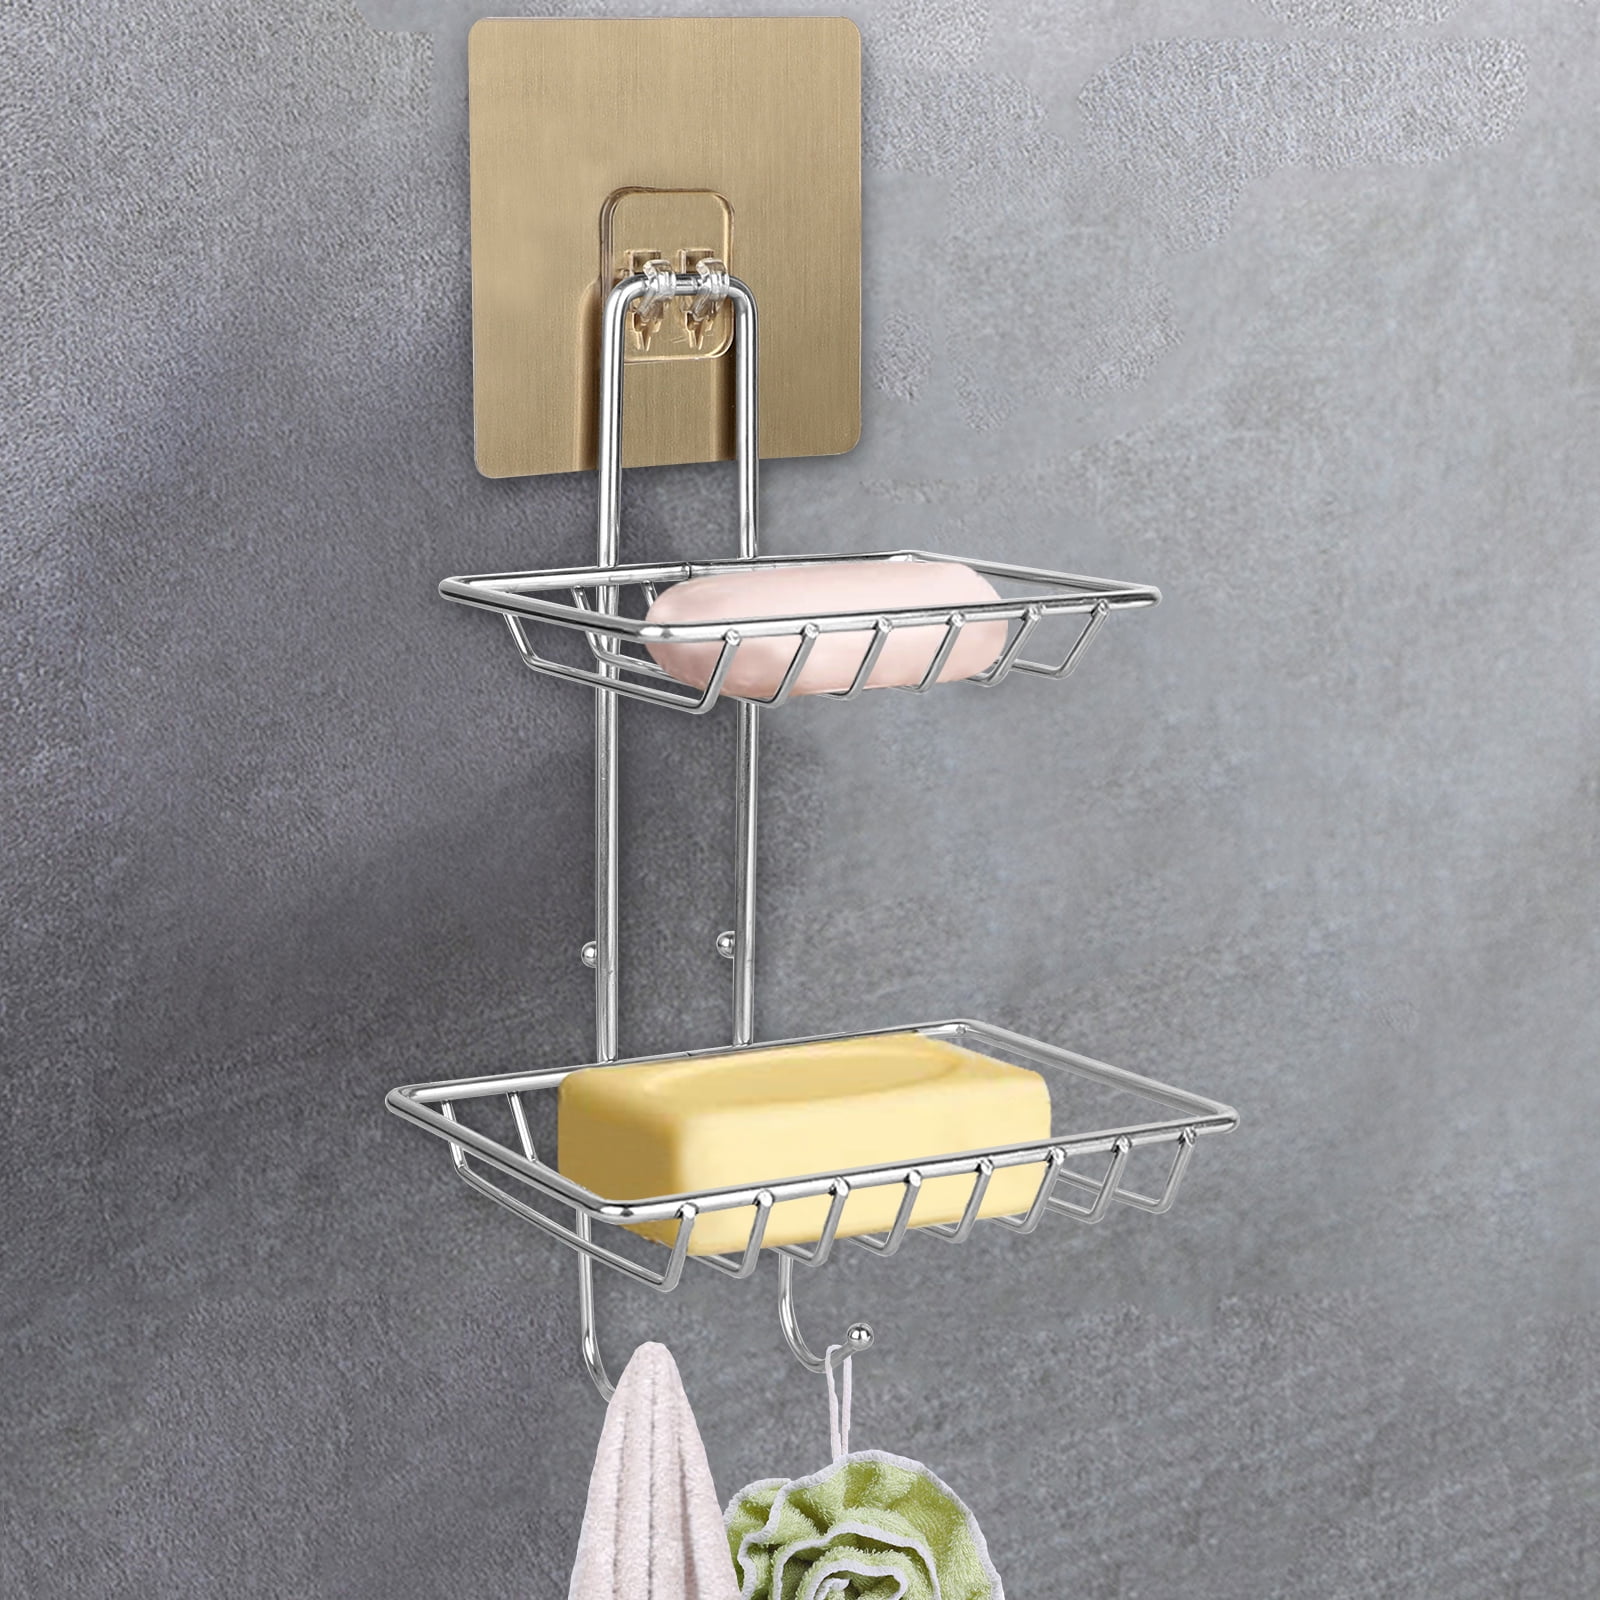 Silver Wall Mounted Shower Soap Holder Soap Dish Basket Tray Rack S 